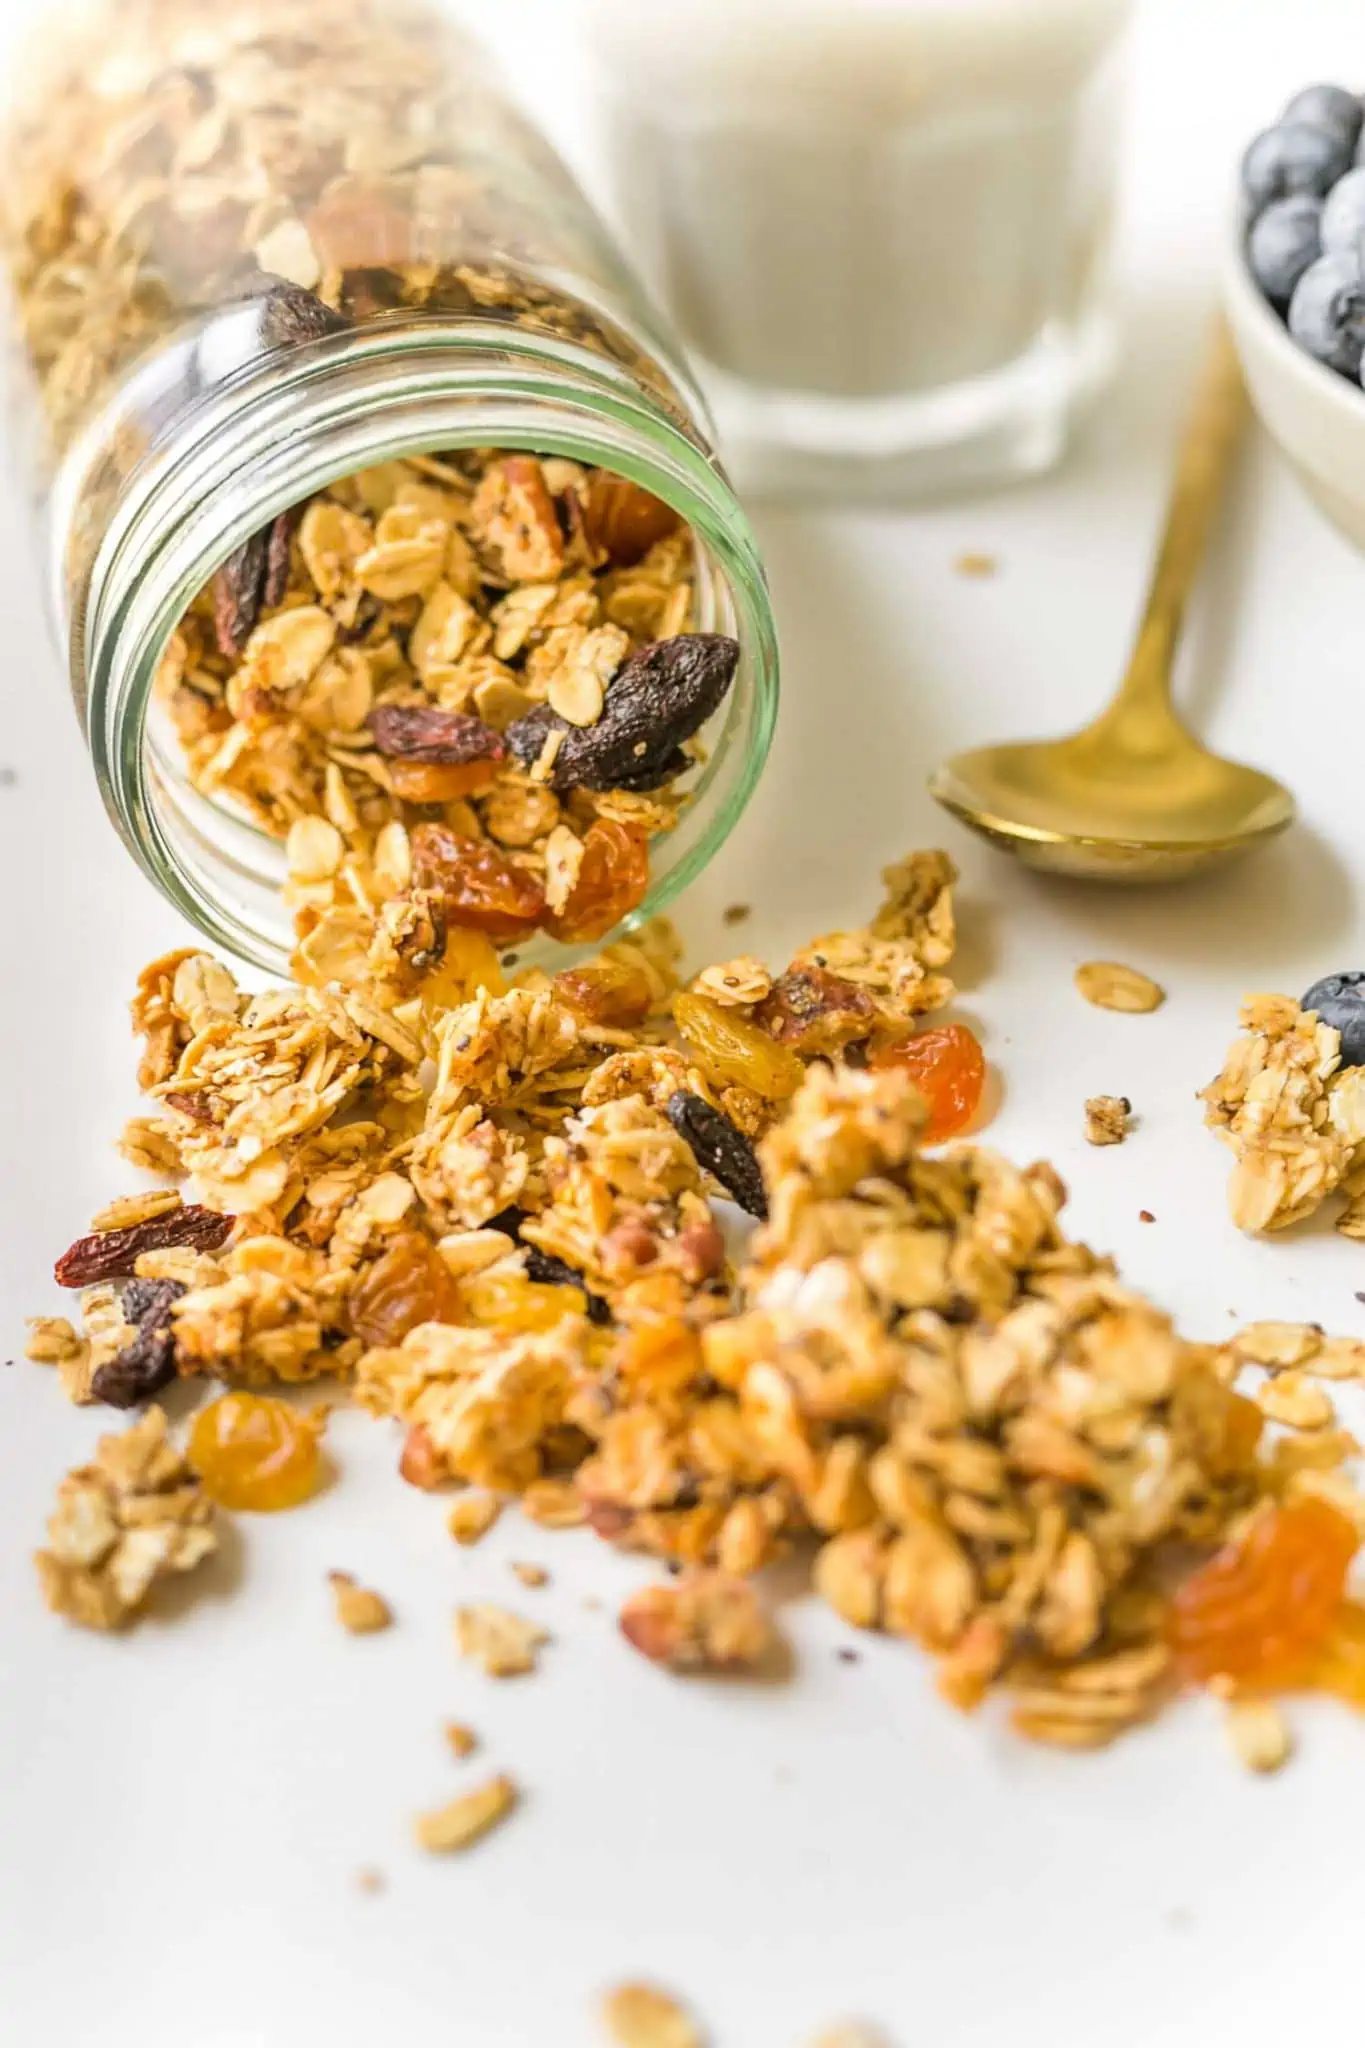 Mason jar filled with homemade granola spilled on white surface